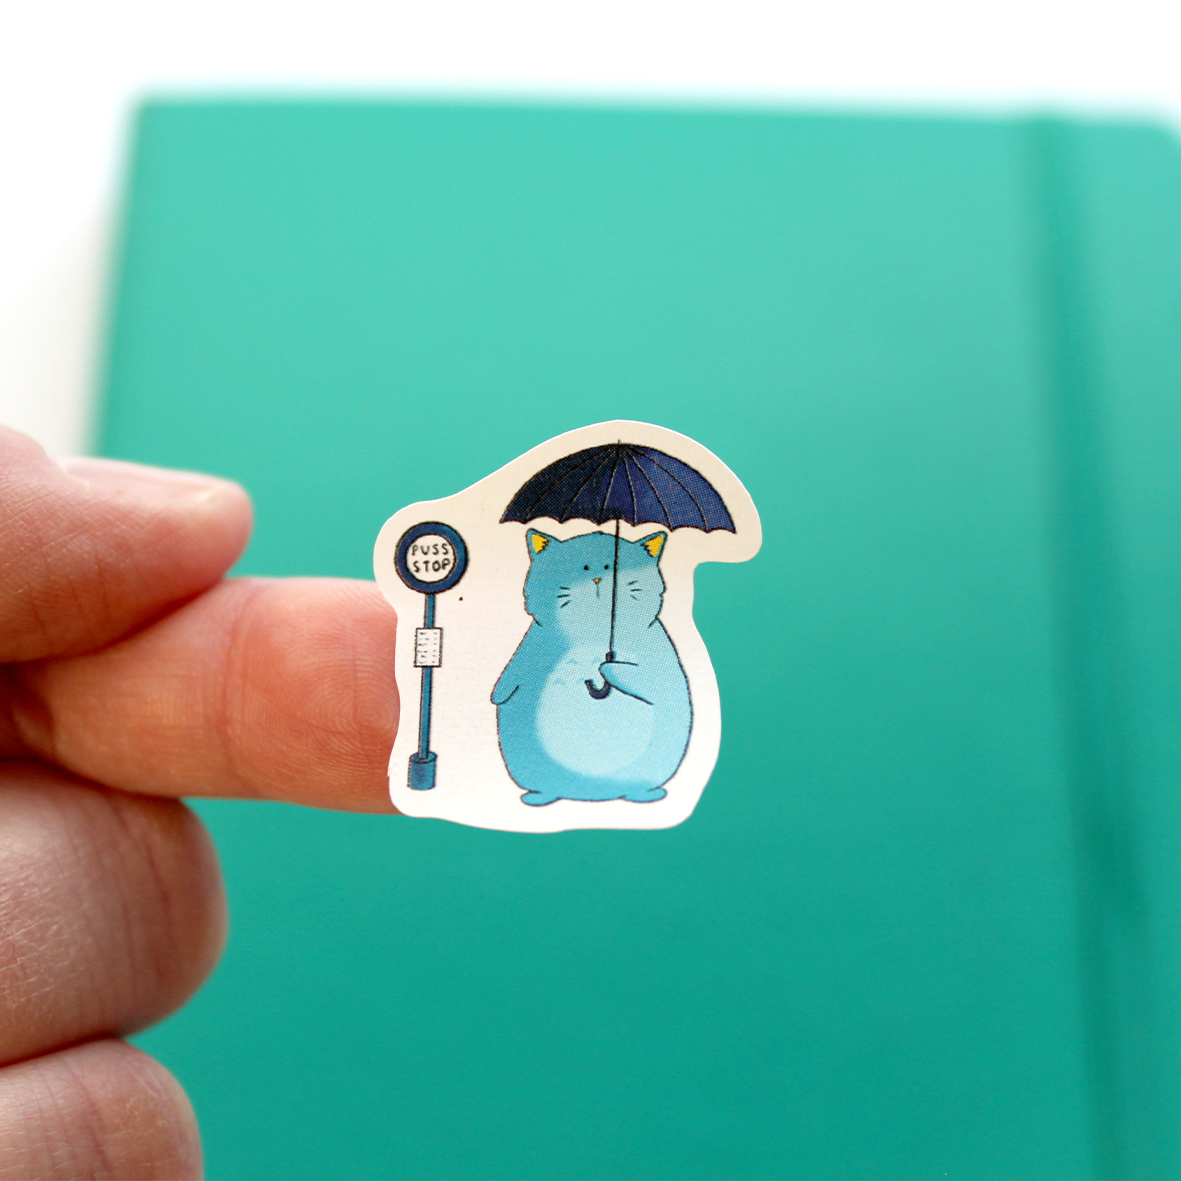 A small blue cat sticker is shown on a finger, It has been kiss-cut. The cat holds an umbrella and has been inspired by Totoro.